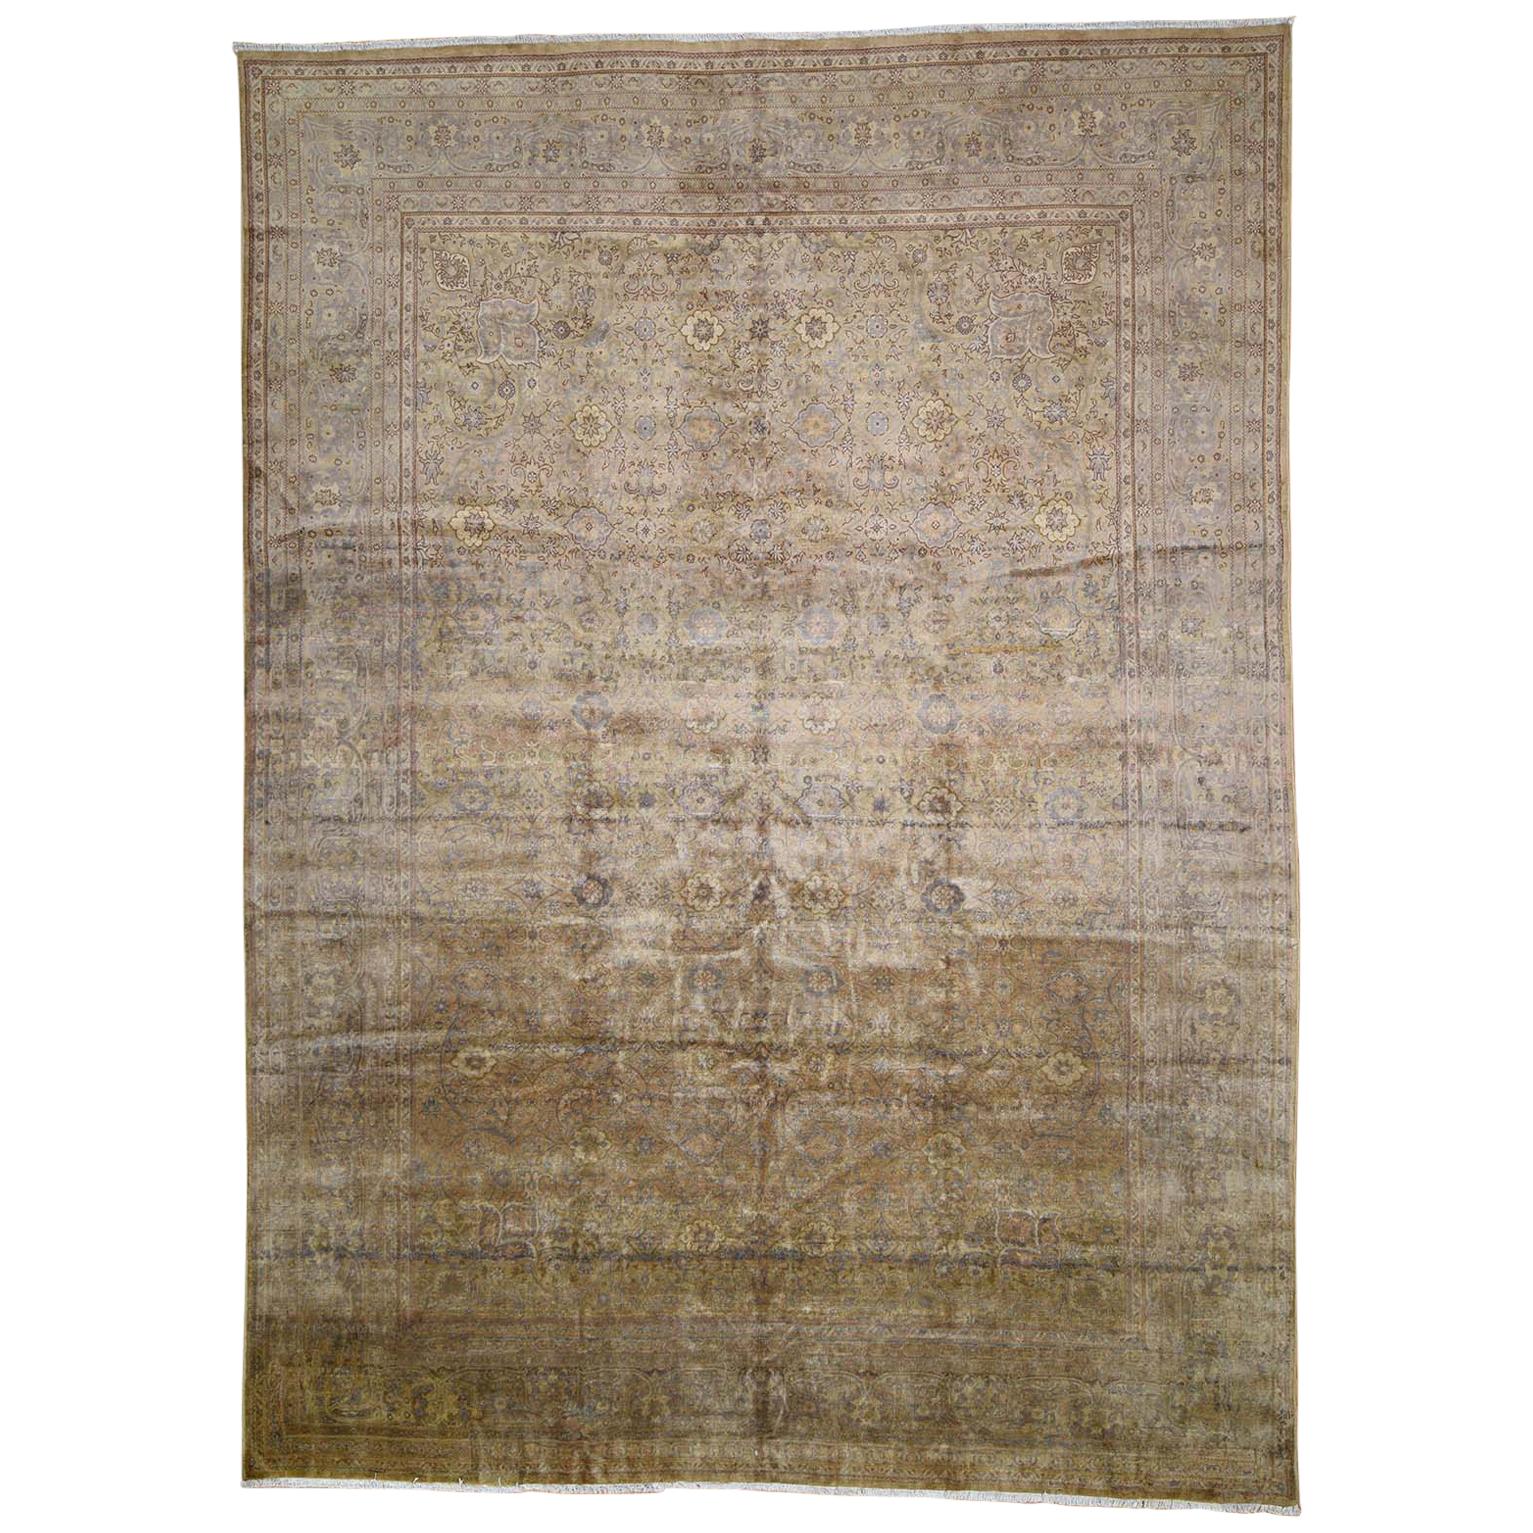 1920 Turkish Sivas Rug Even Wear and Soft, Camel and Beige